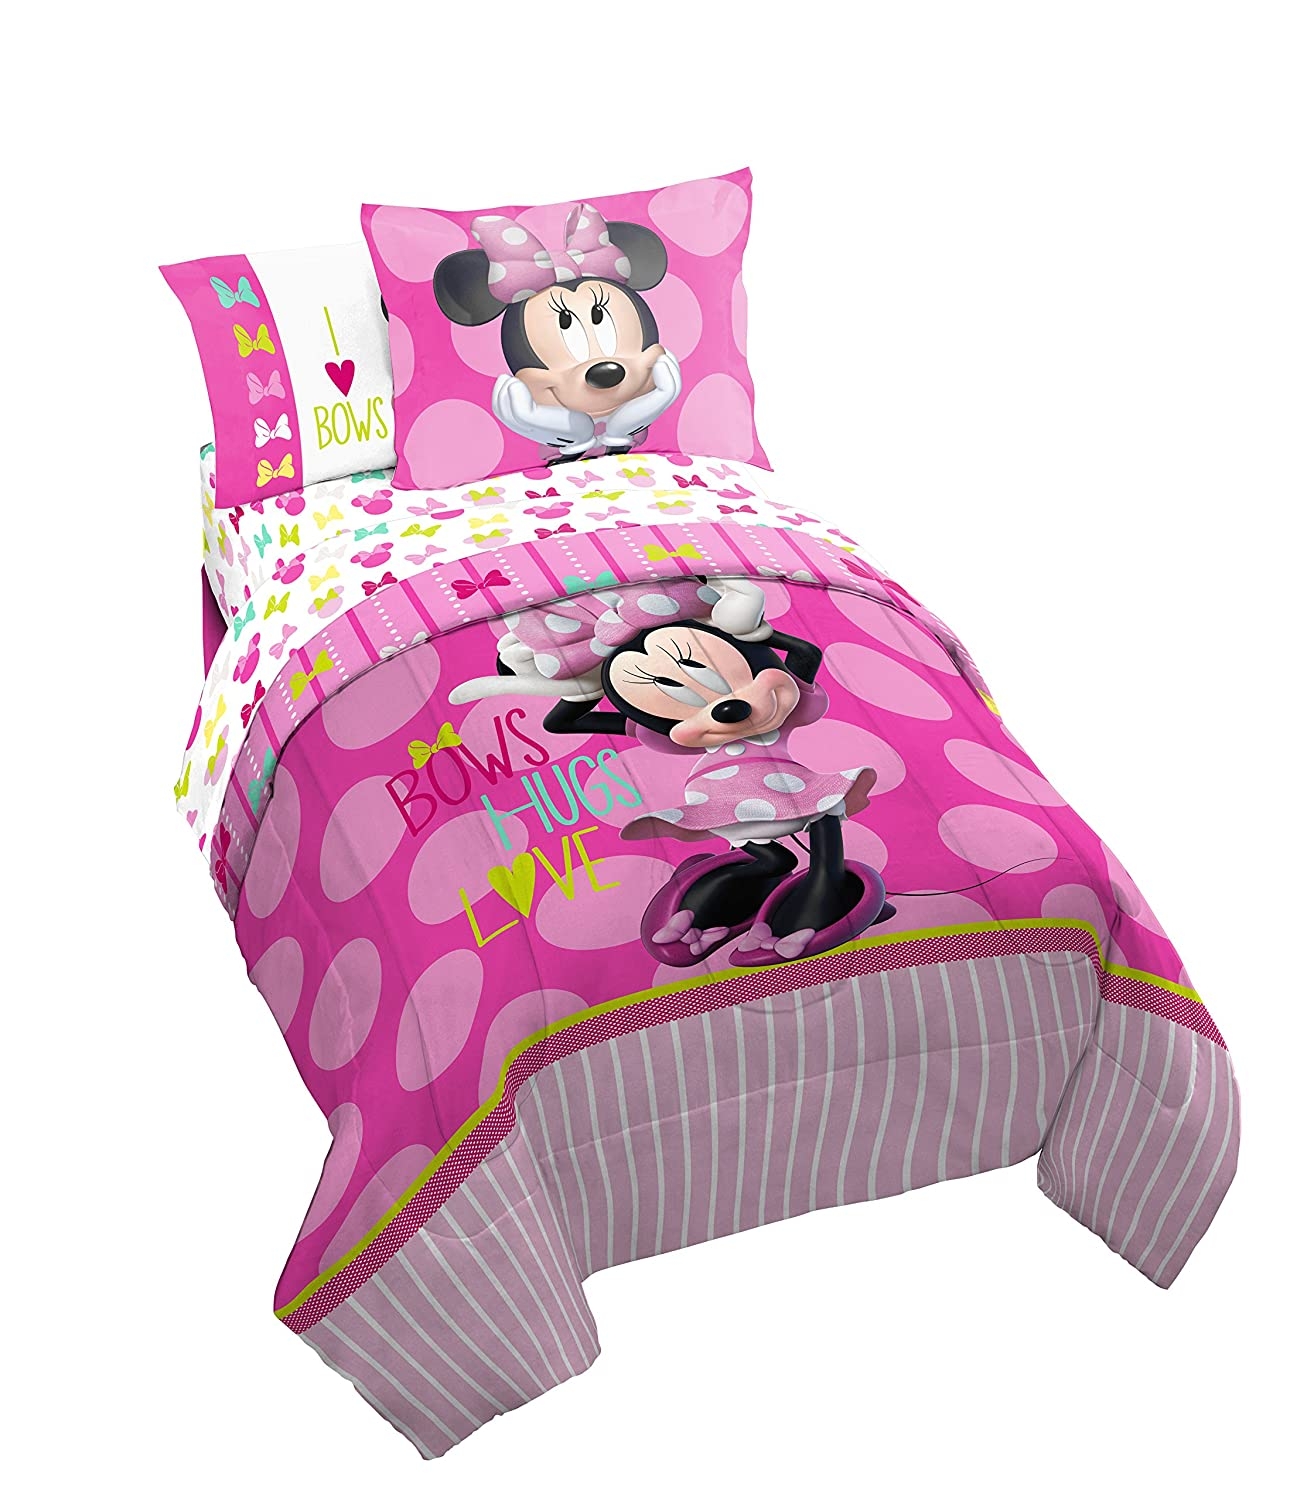 Jay Franco Disney Minnie Mouse Purple Love 4 Piece Twin Bed Set Official Disney Product Includes Reversible Comforter & Sheet Set Super Soft Fade Resistant Polyester - 